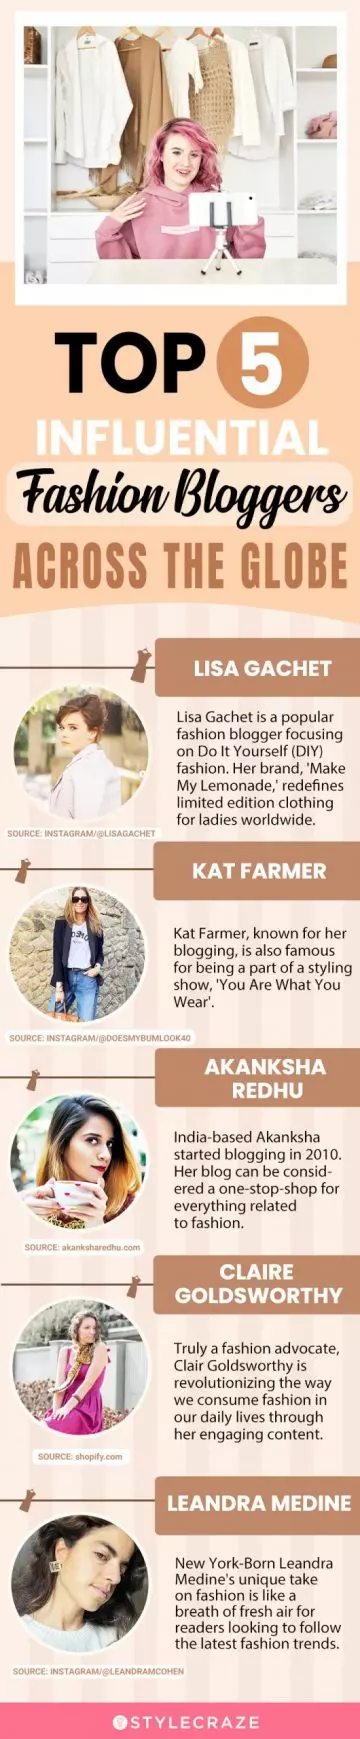 top 5 influential fashion bloggers across the globe (infographic)